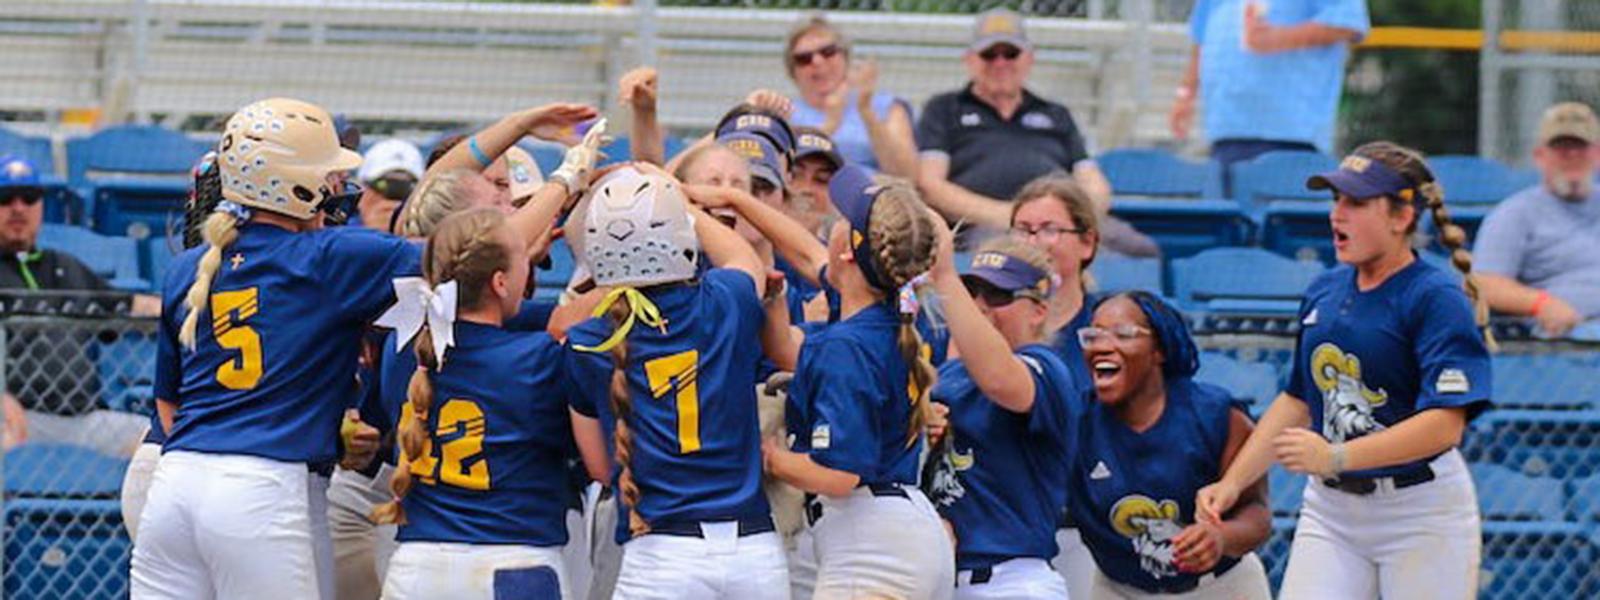 The Rams celebrate Lauren Baker's home run in the championship game. 